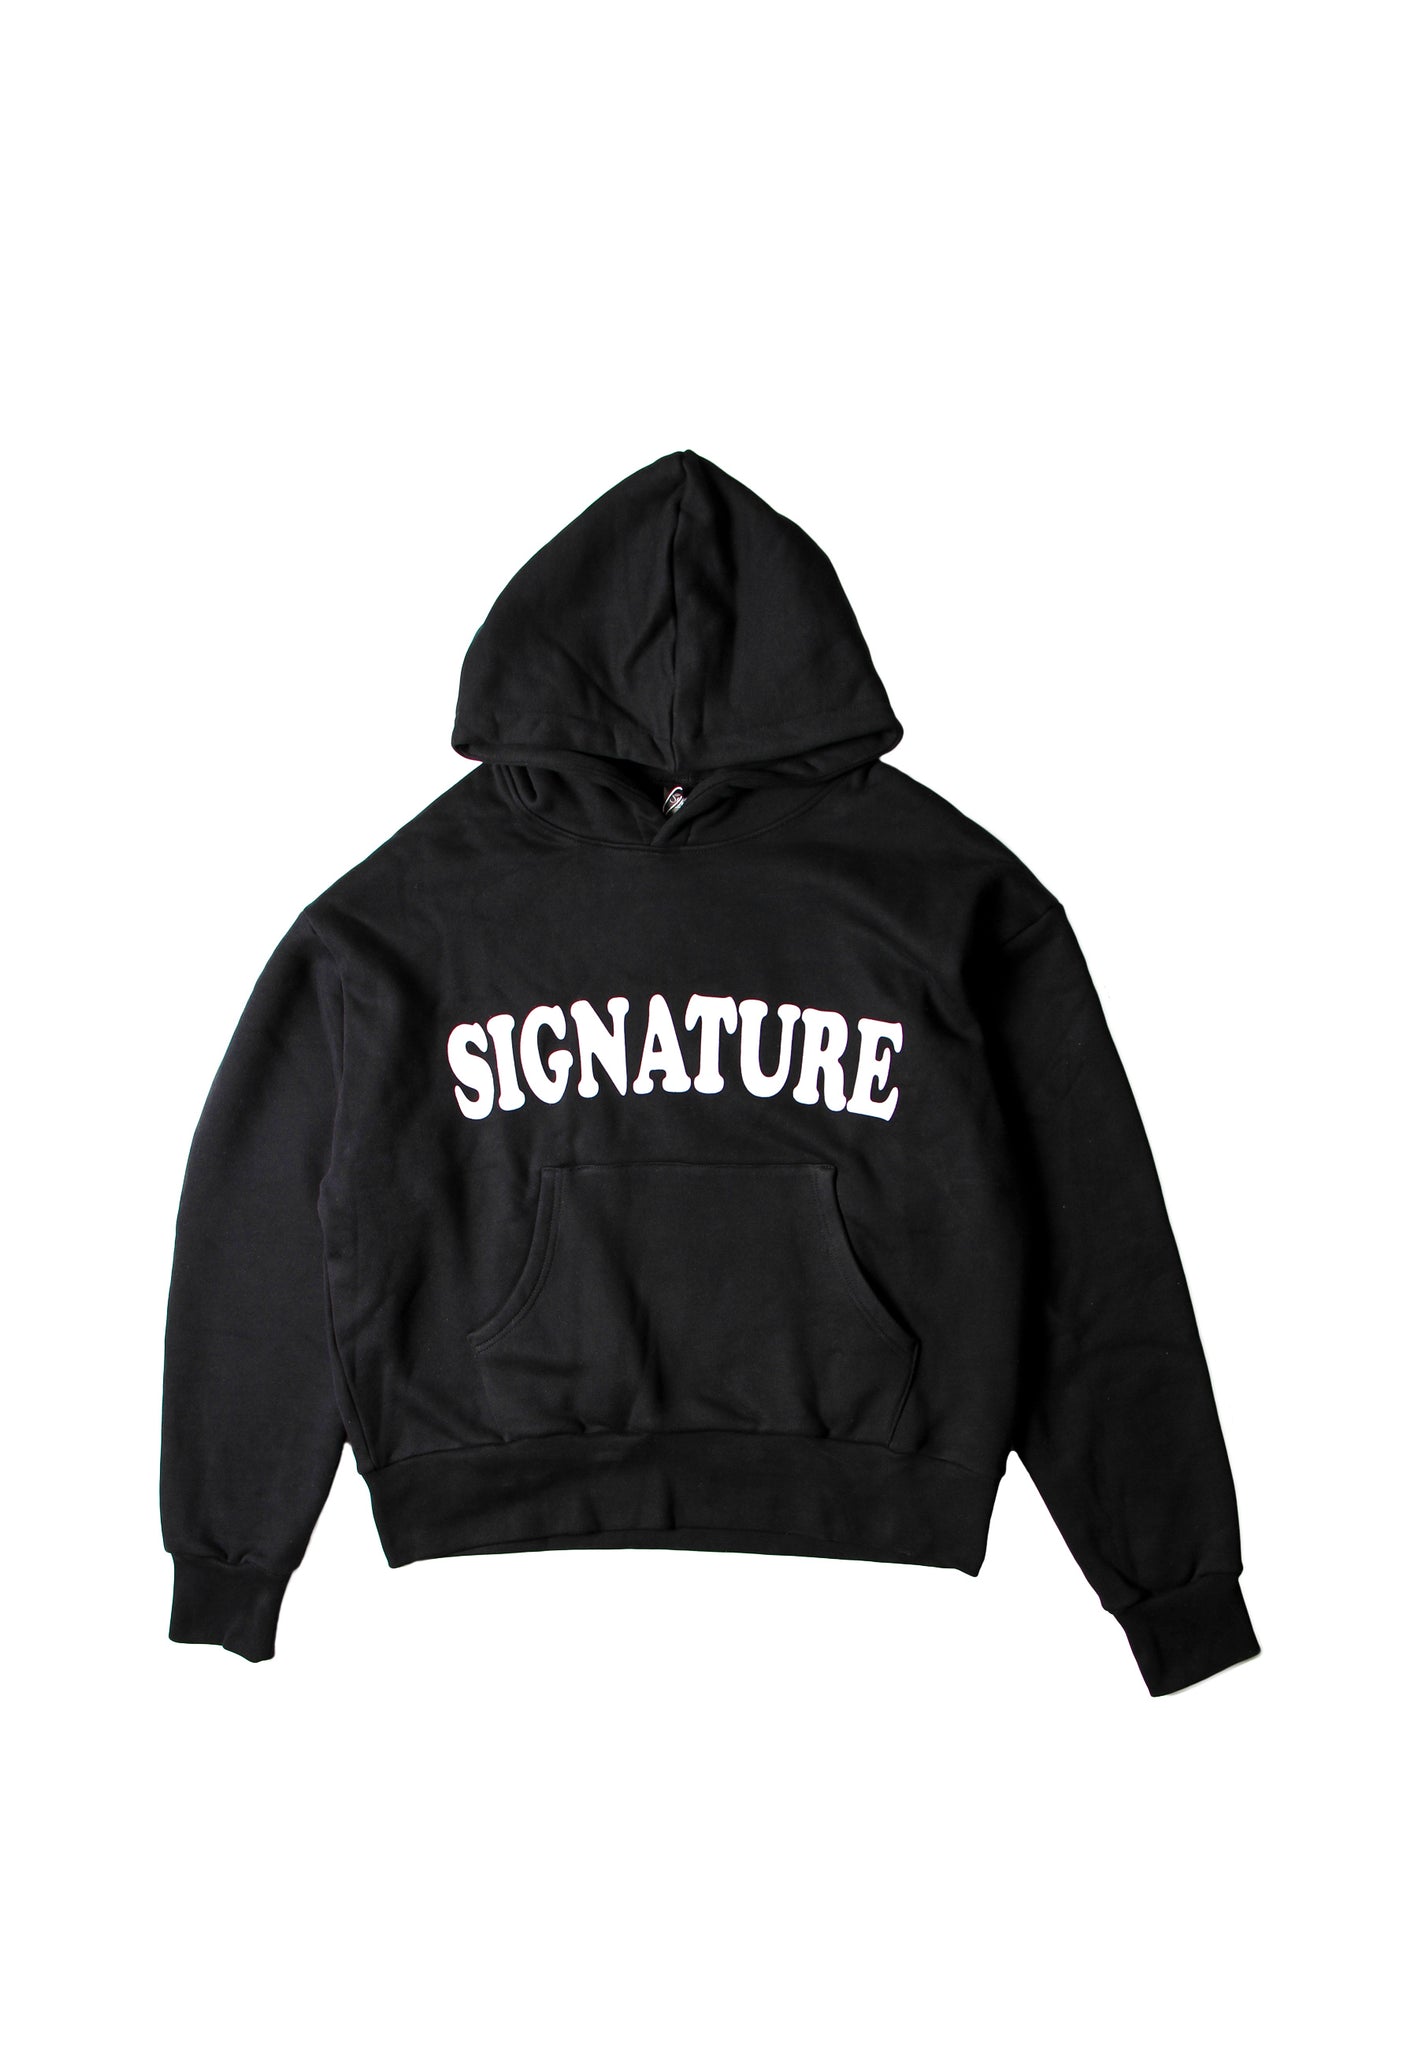 Oversized fit Signature Noir Print Hoodie front view media